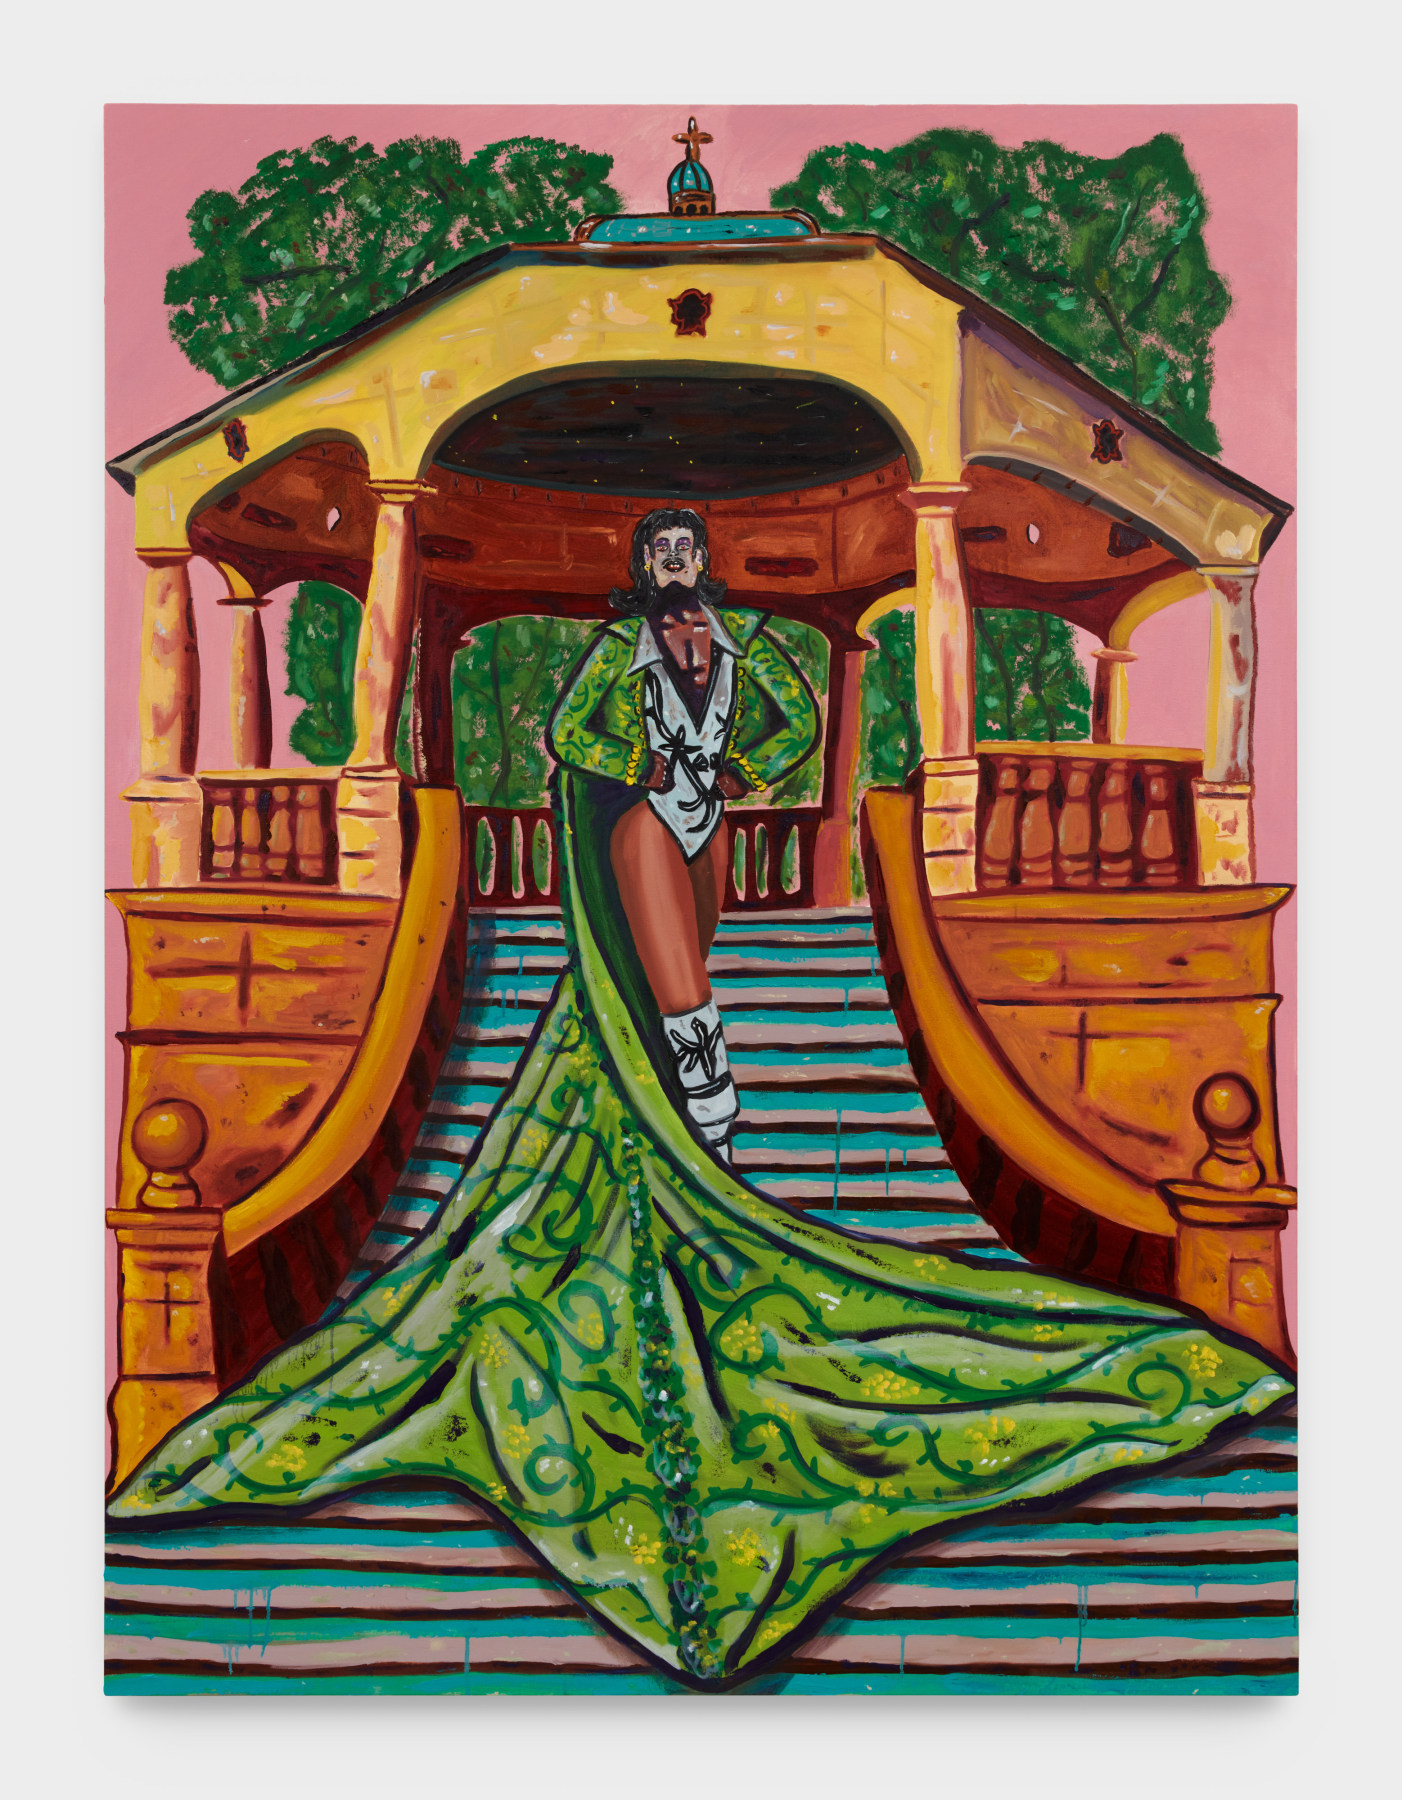 Marcel Alcalá's artwork "Presence of Mind". A figure stands proudly on the steps of a gazebo wearing a long green jacket with their hands on their hips. 72 x 54 in (182.9 x 137.2 cm), oil on canvas, 2023